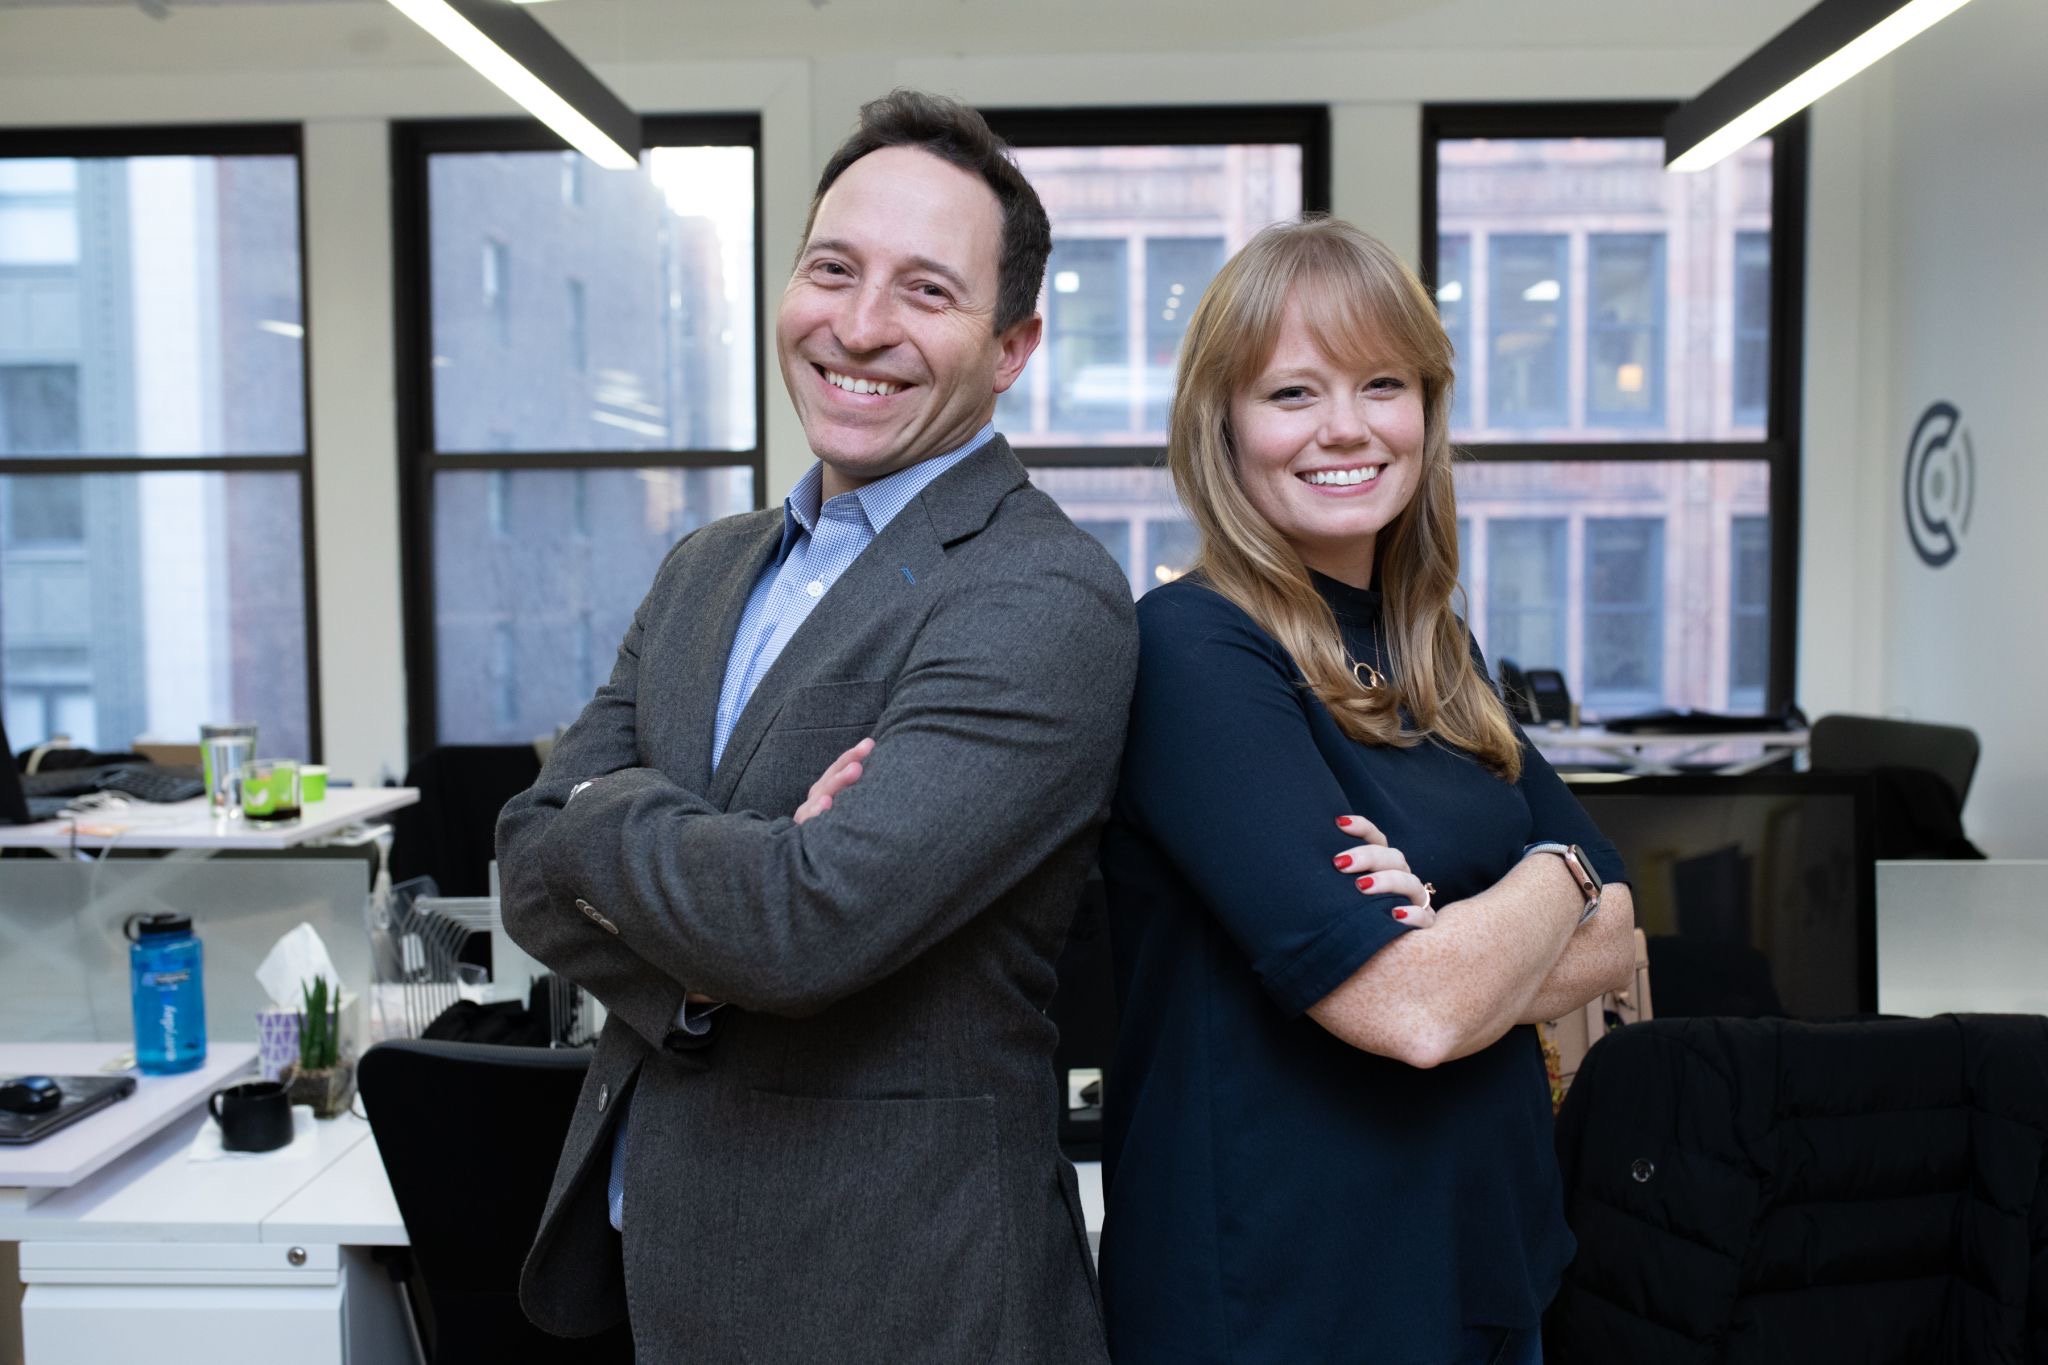 Harvey Hudes (left) and Grace Keith Rodriguez (right), CIO and CEO of fintech public relations firm, Caliber.